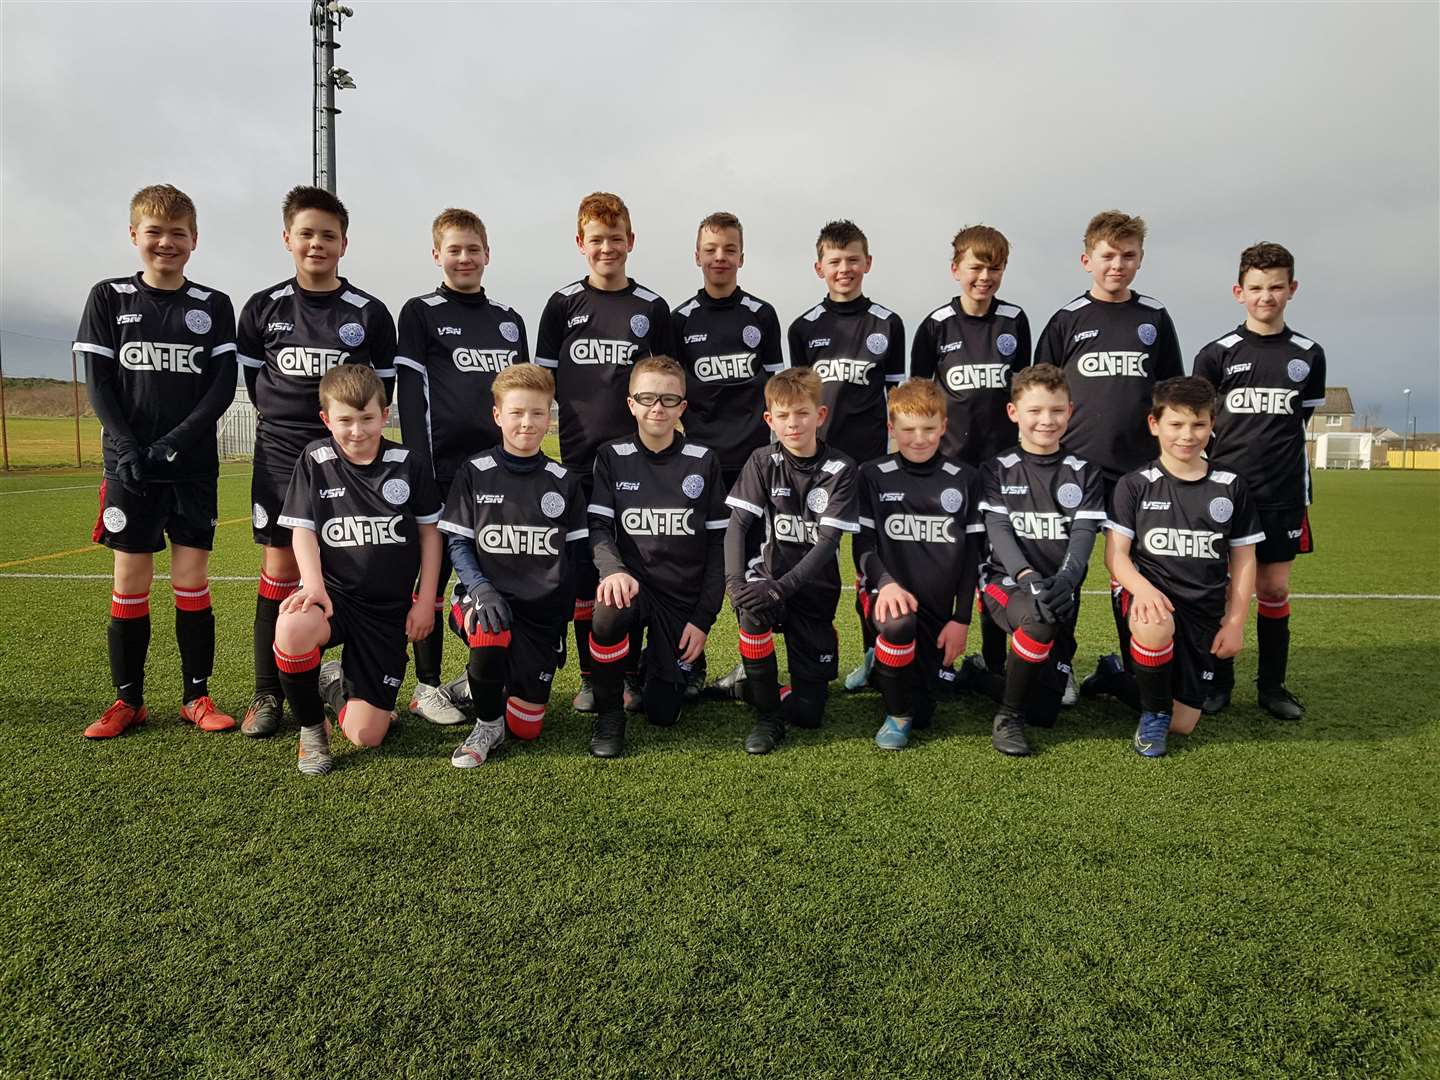 The Caithness United under-13s who had a 6-0 win against their Forres counterparts.